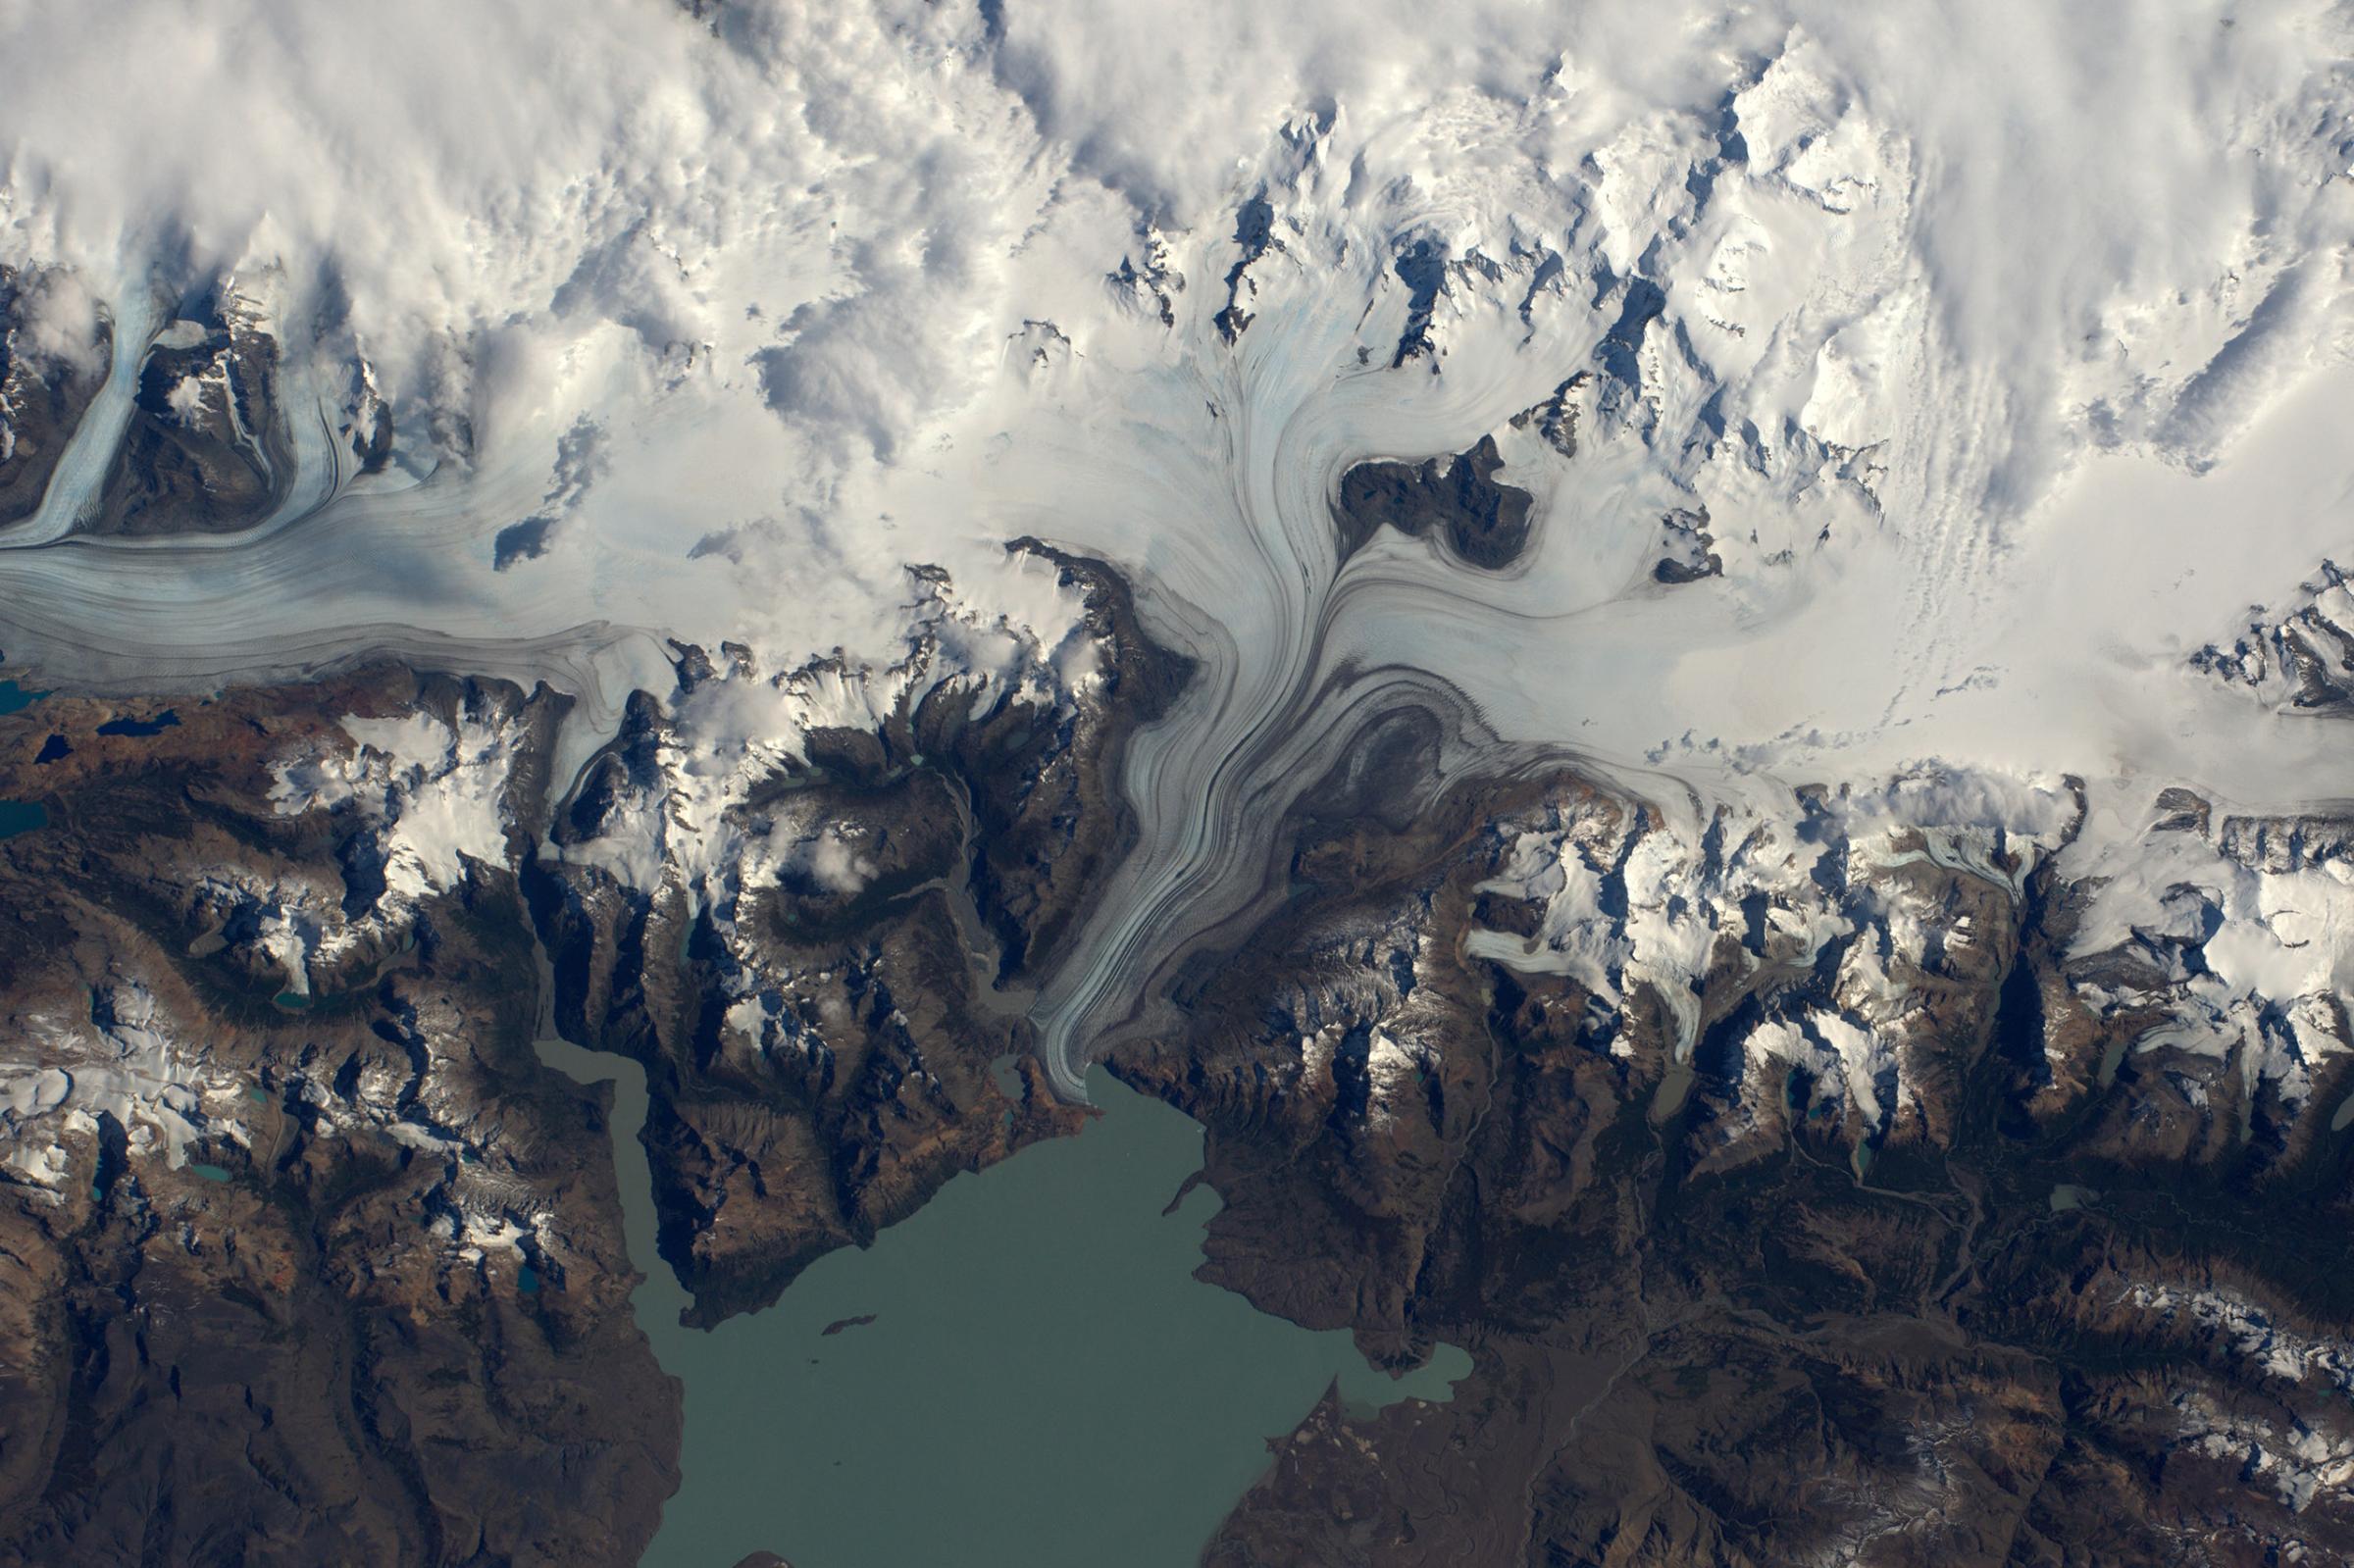 Lake Viedma in the southern ice fields of Patagonia, March 24, 2016.